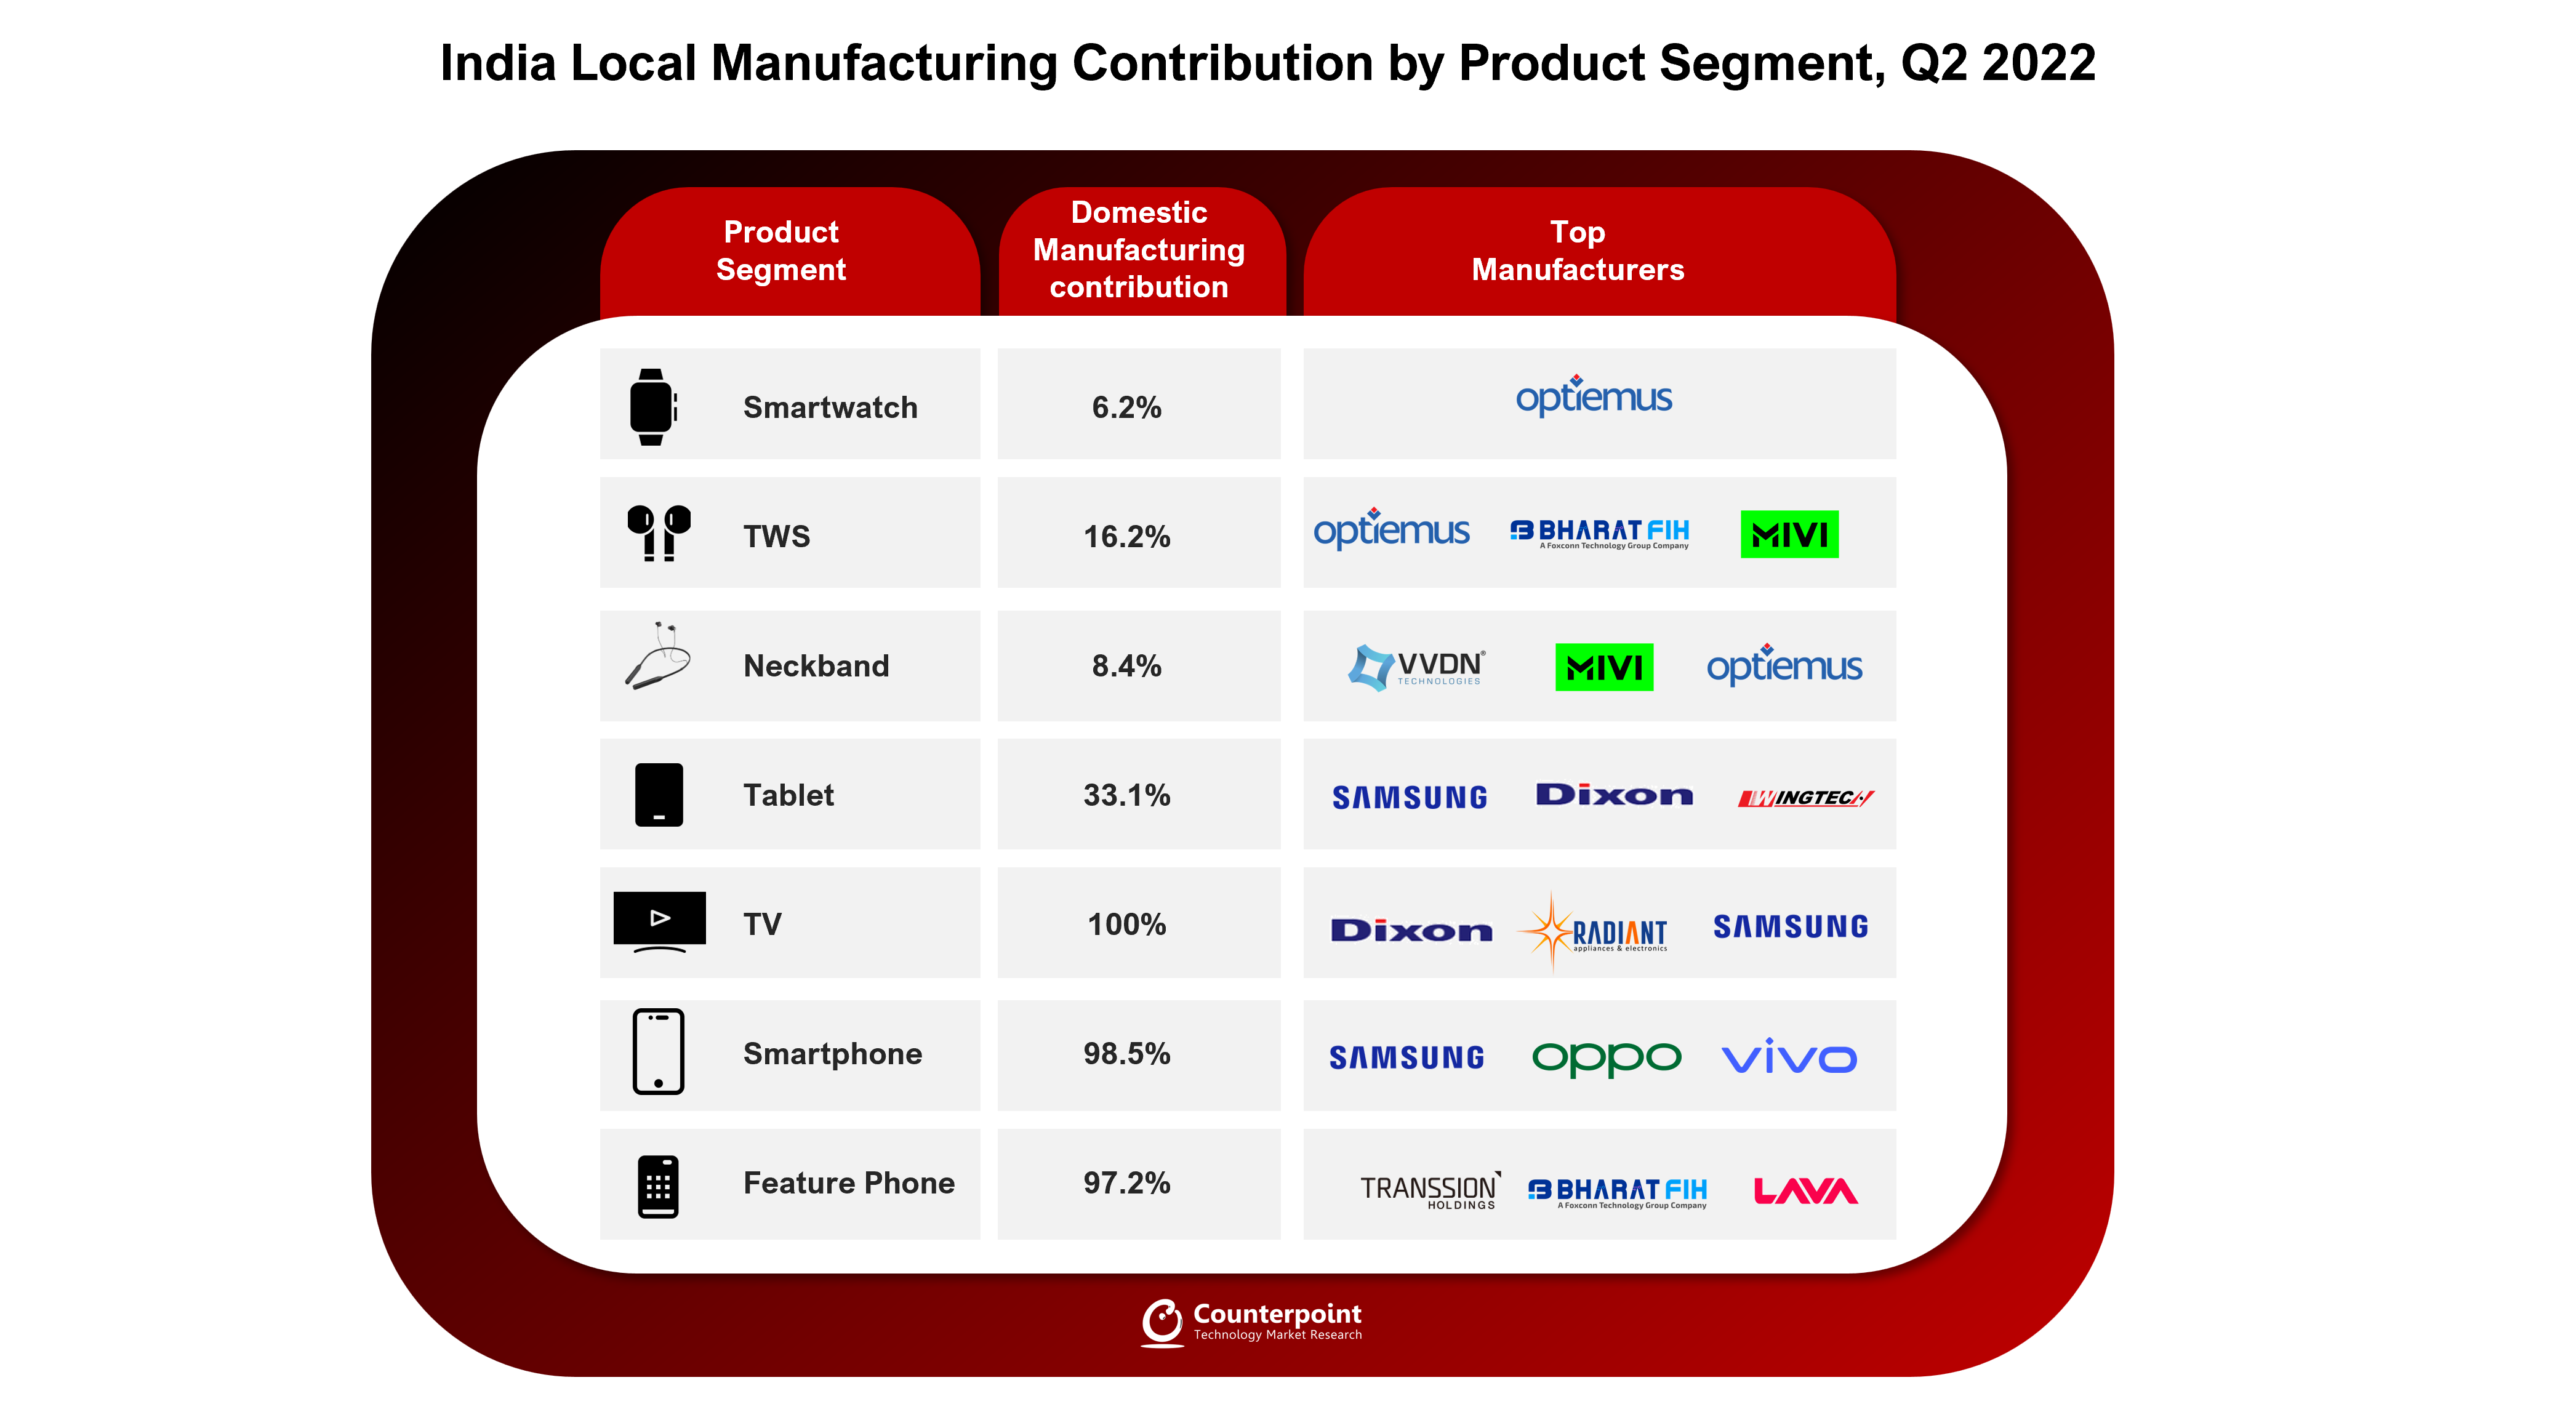 Counterpoint - India Local Manufacturing Contribution by Product Segment Q2 2022